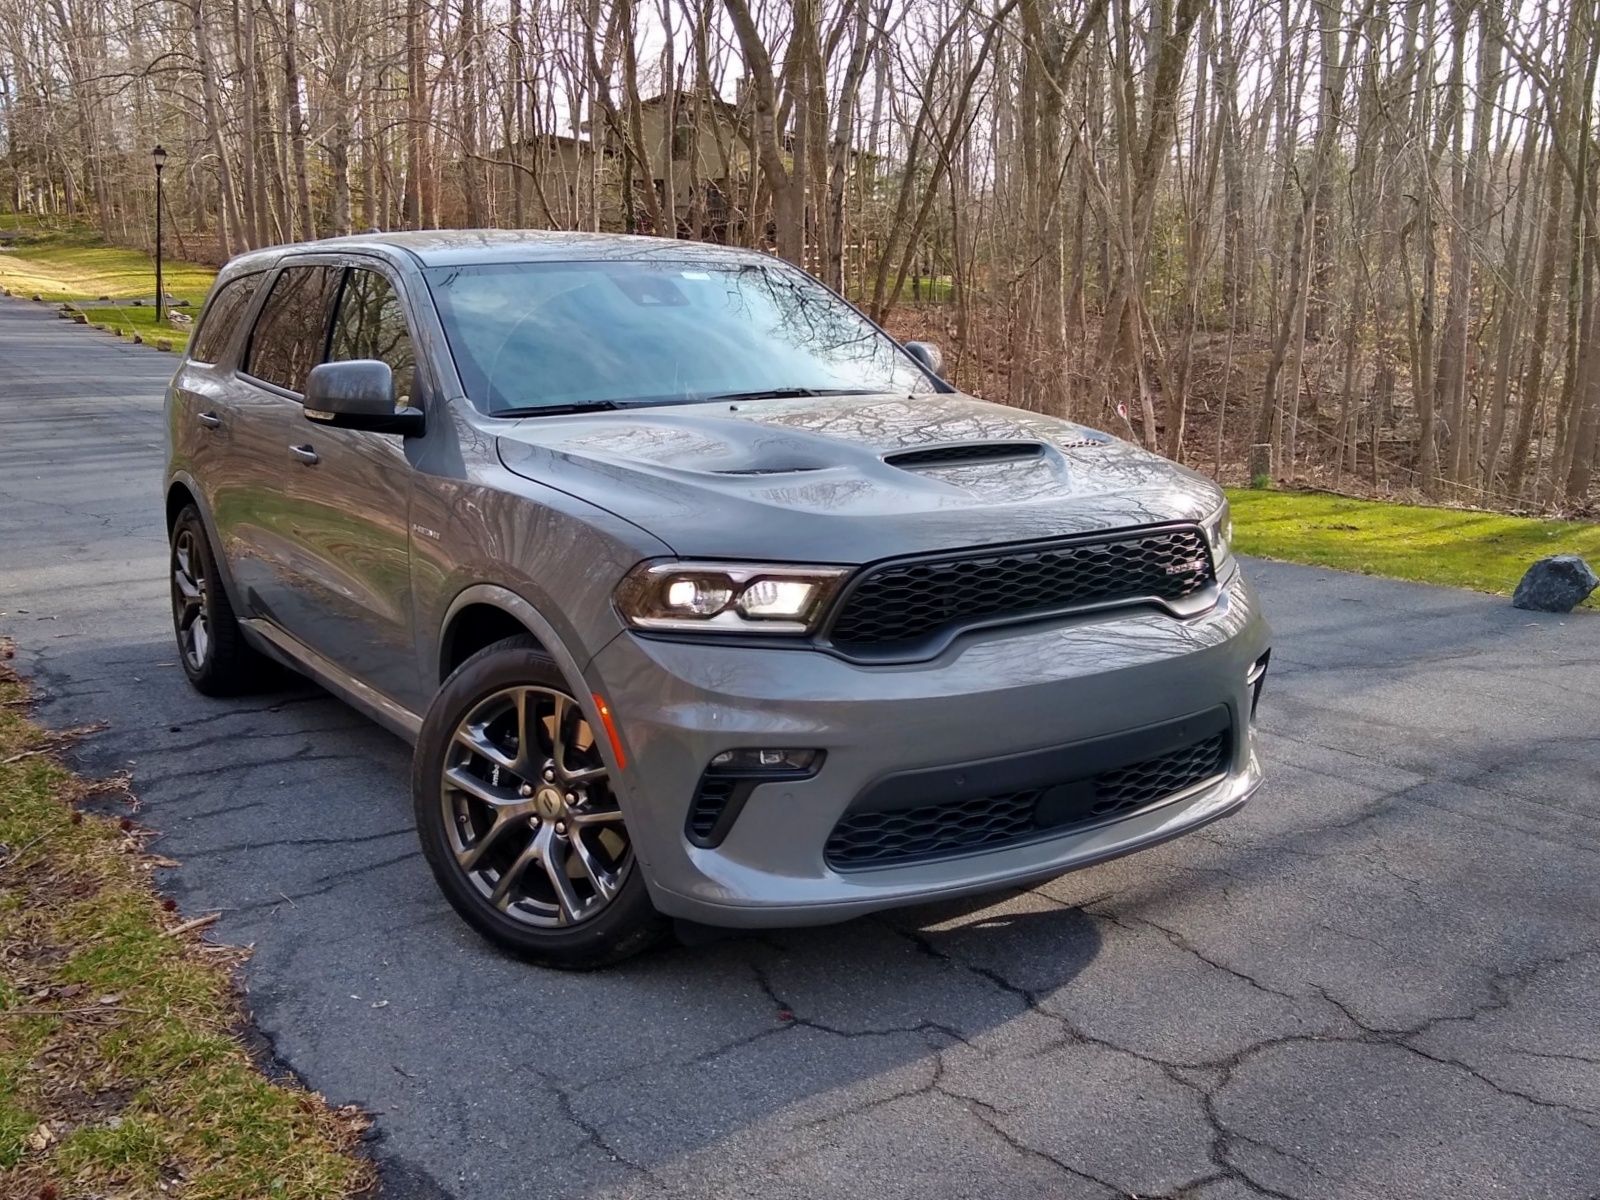 2022 2022 Dodge Durango Review: Old But Still Relevant